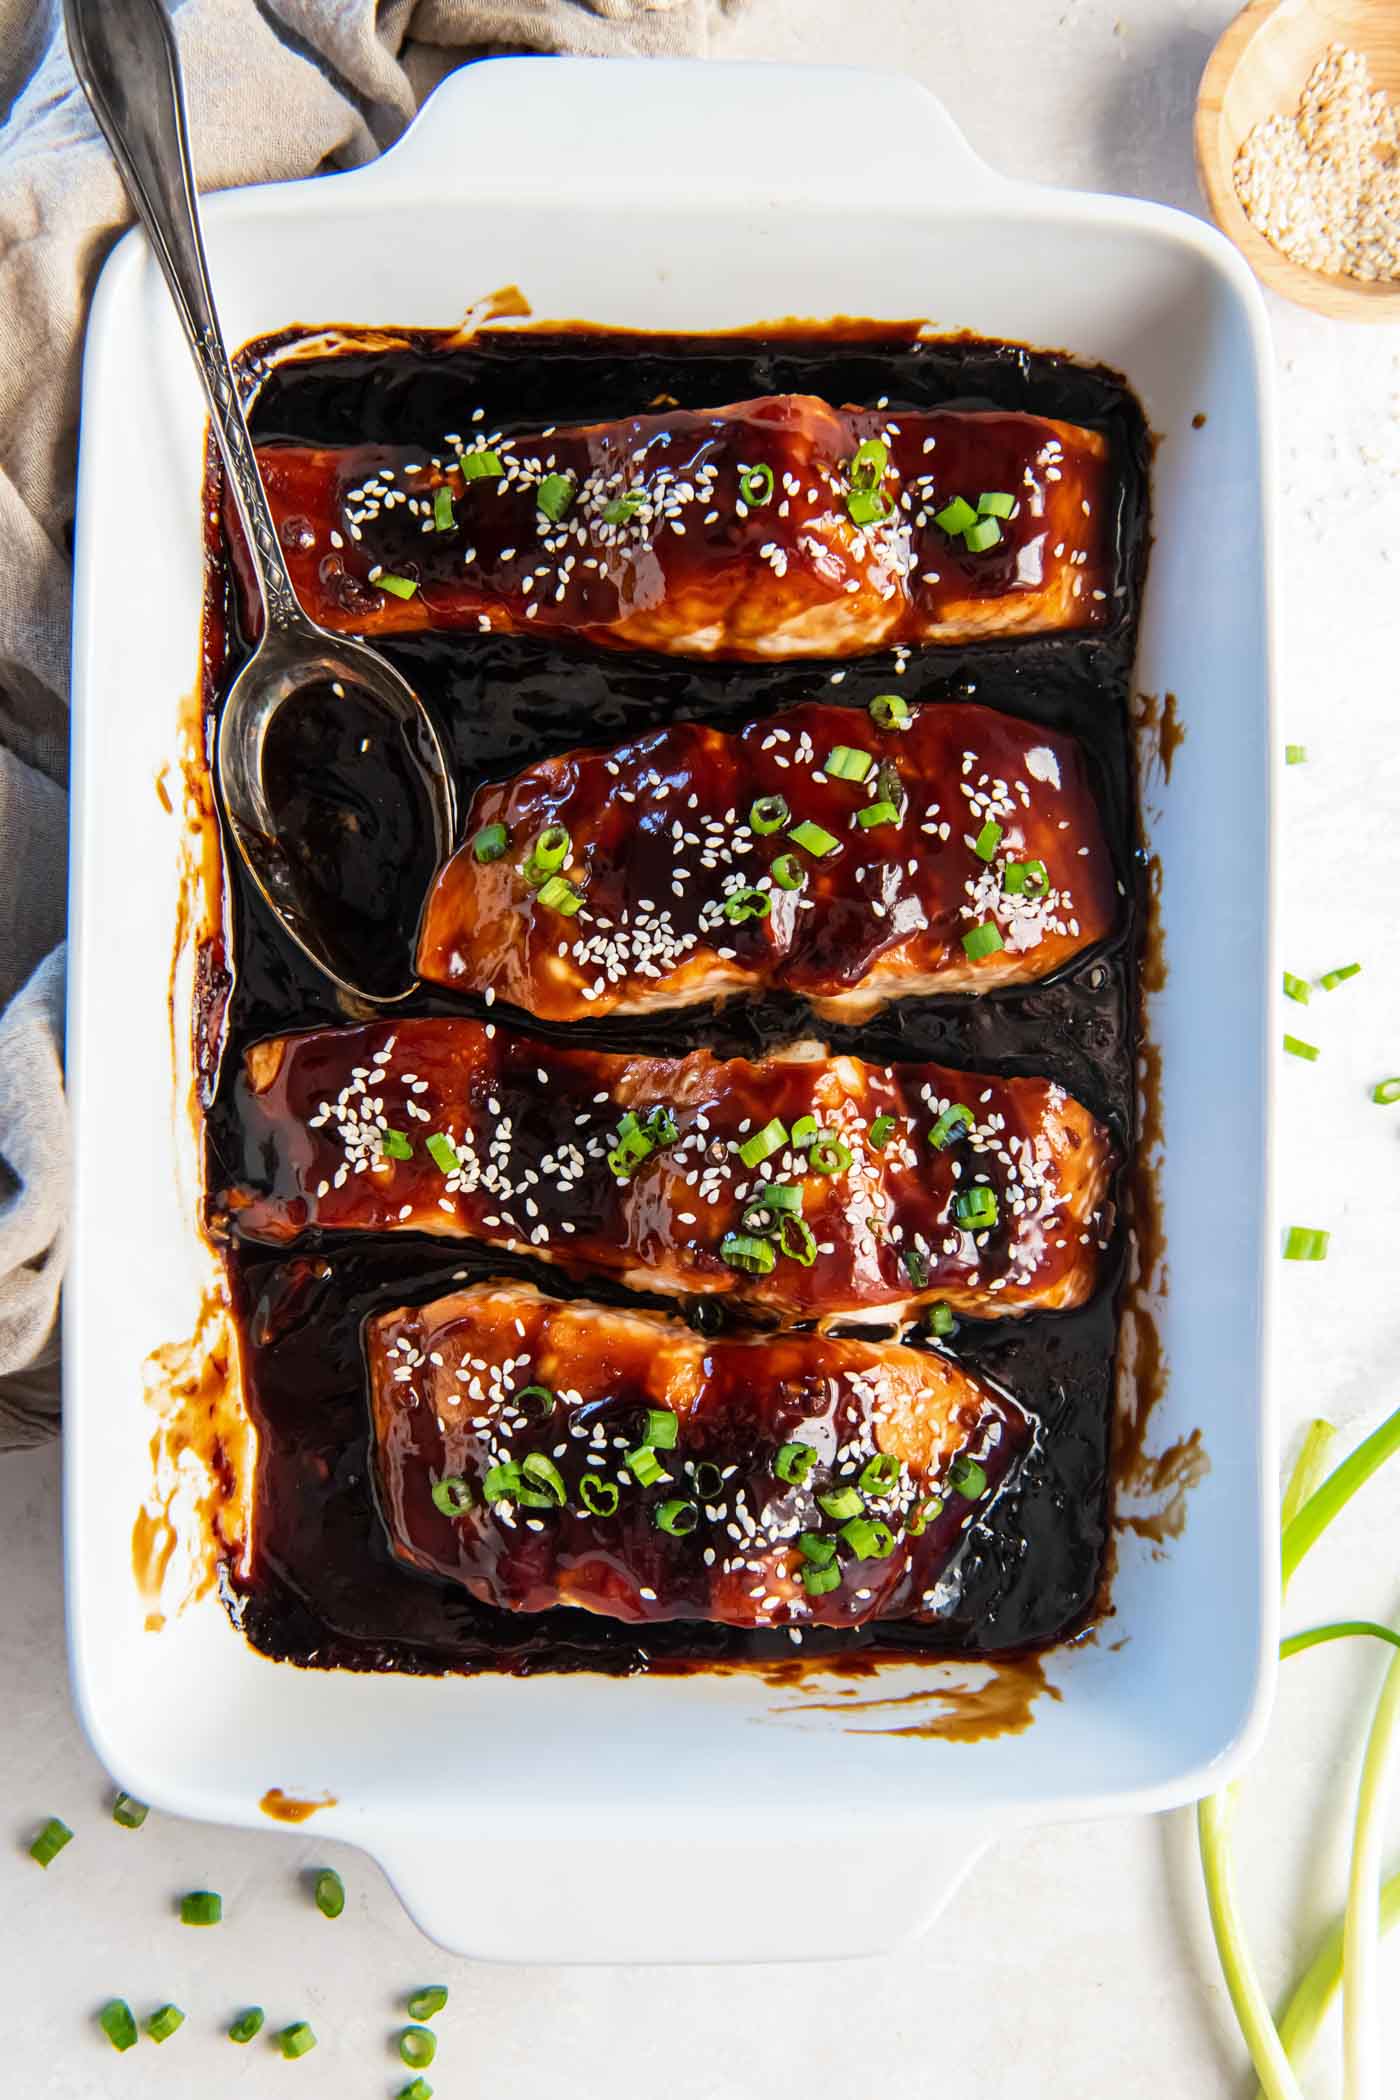 Baked teriyaki salmon in a white baking dish garnished with chopped green onions and sesame seeds.